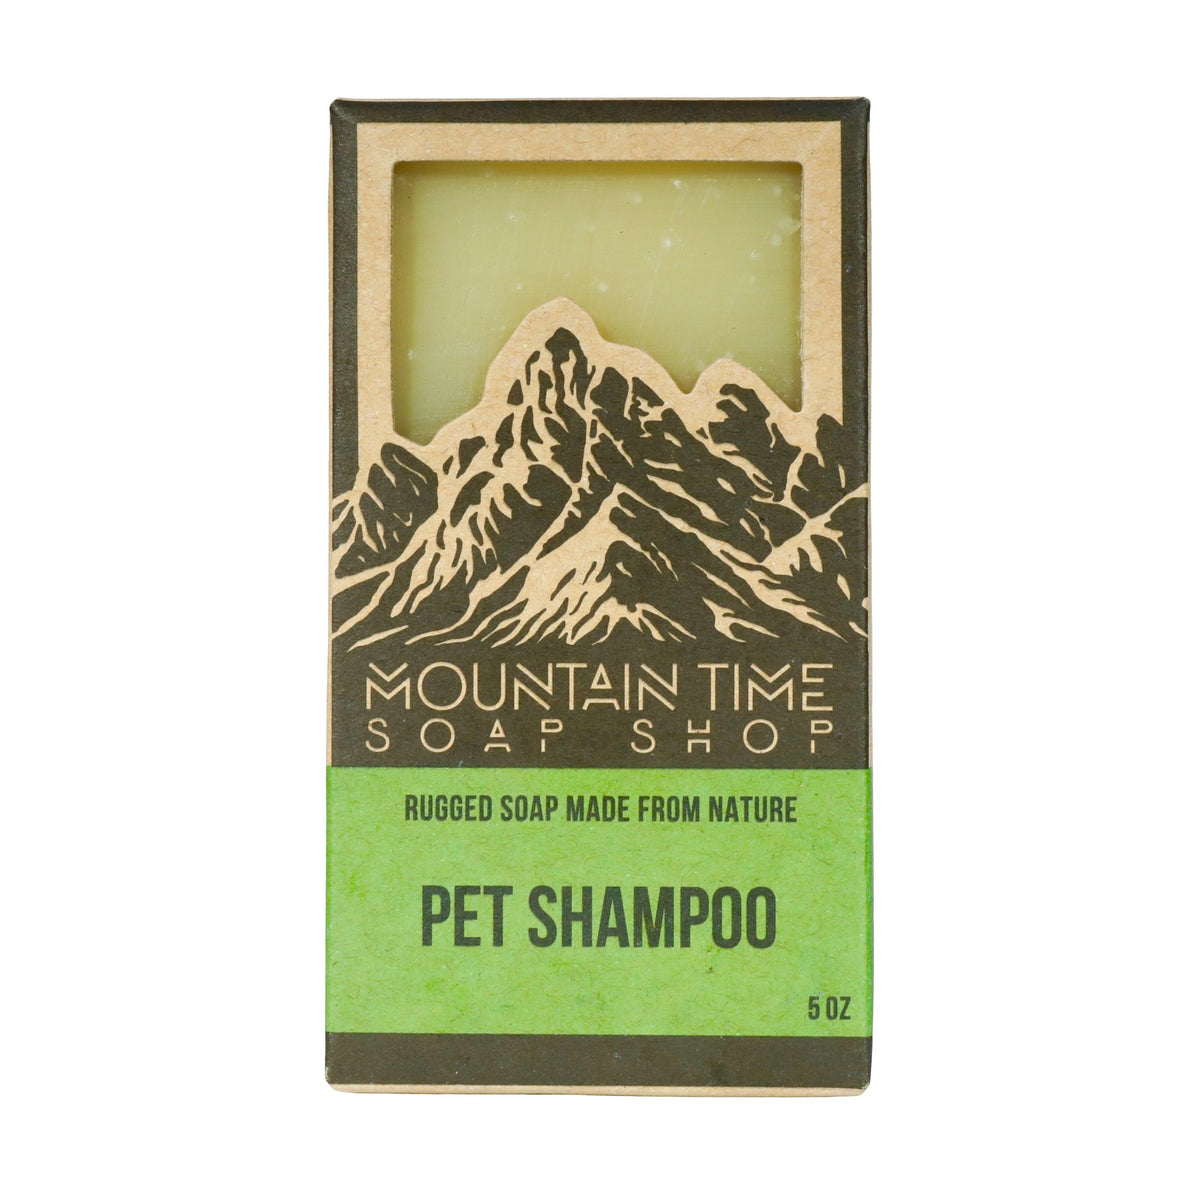 5oz bar pet soap in eco-friendly recycled box with window to view soap